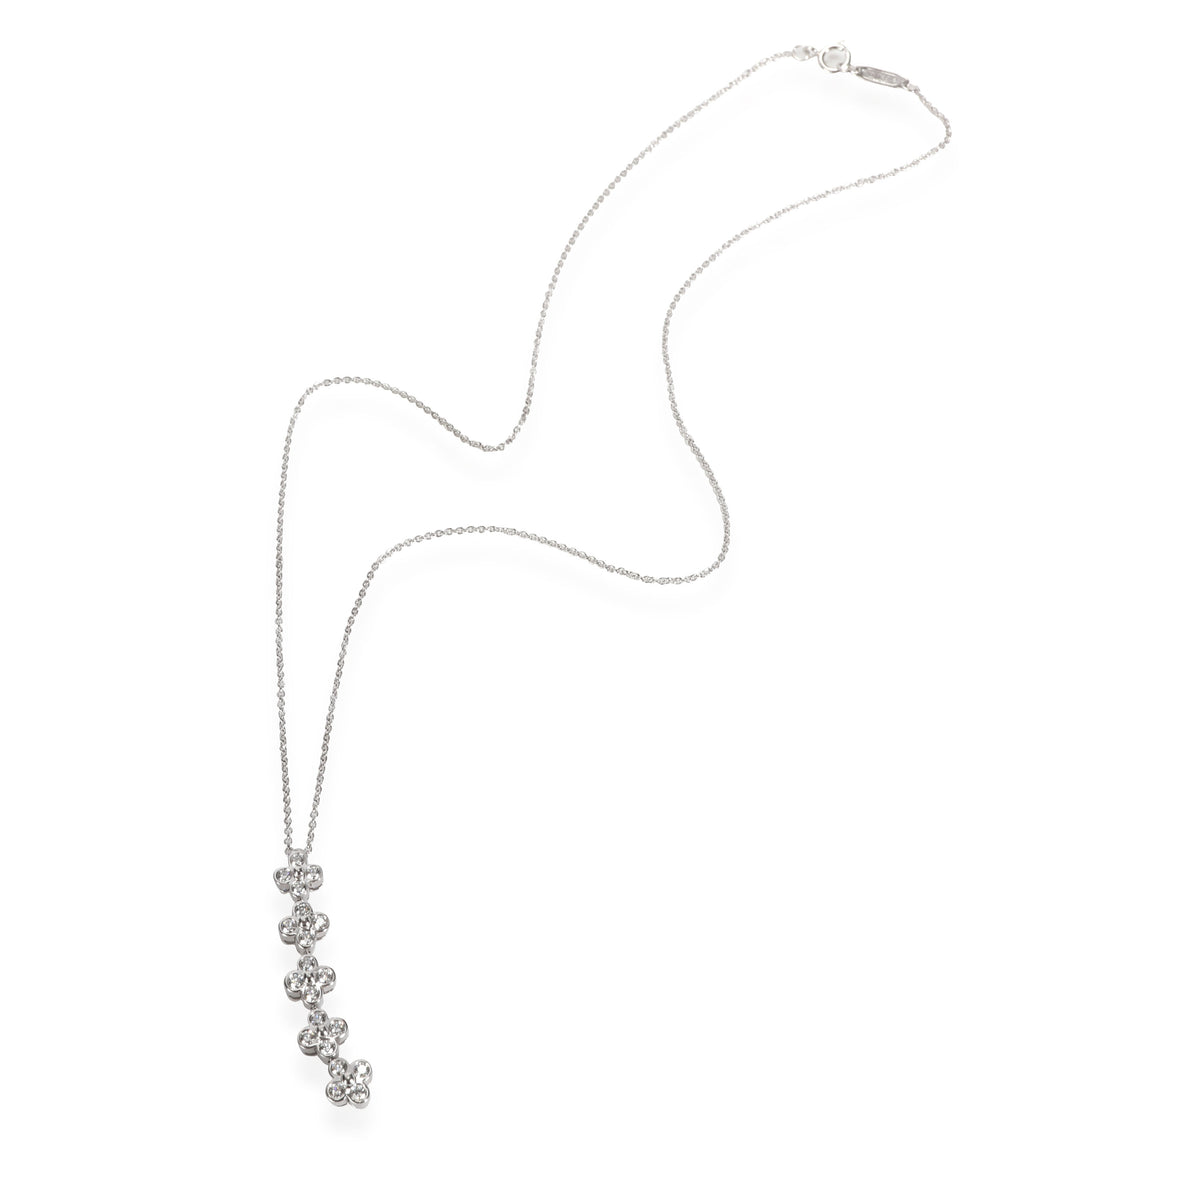 Tiffany & Co. Lace Diamond Necklace in Platinum 0.60 CTW